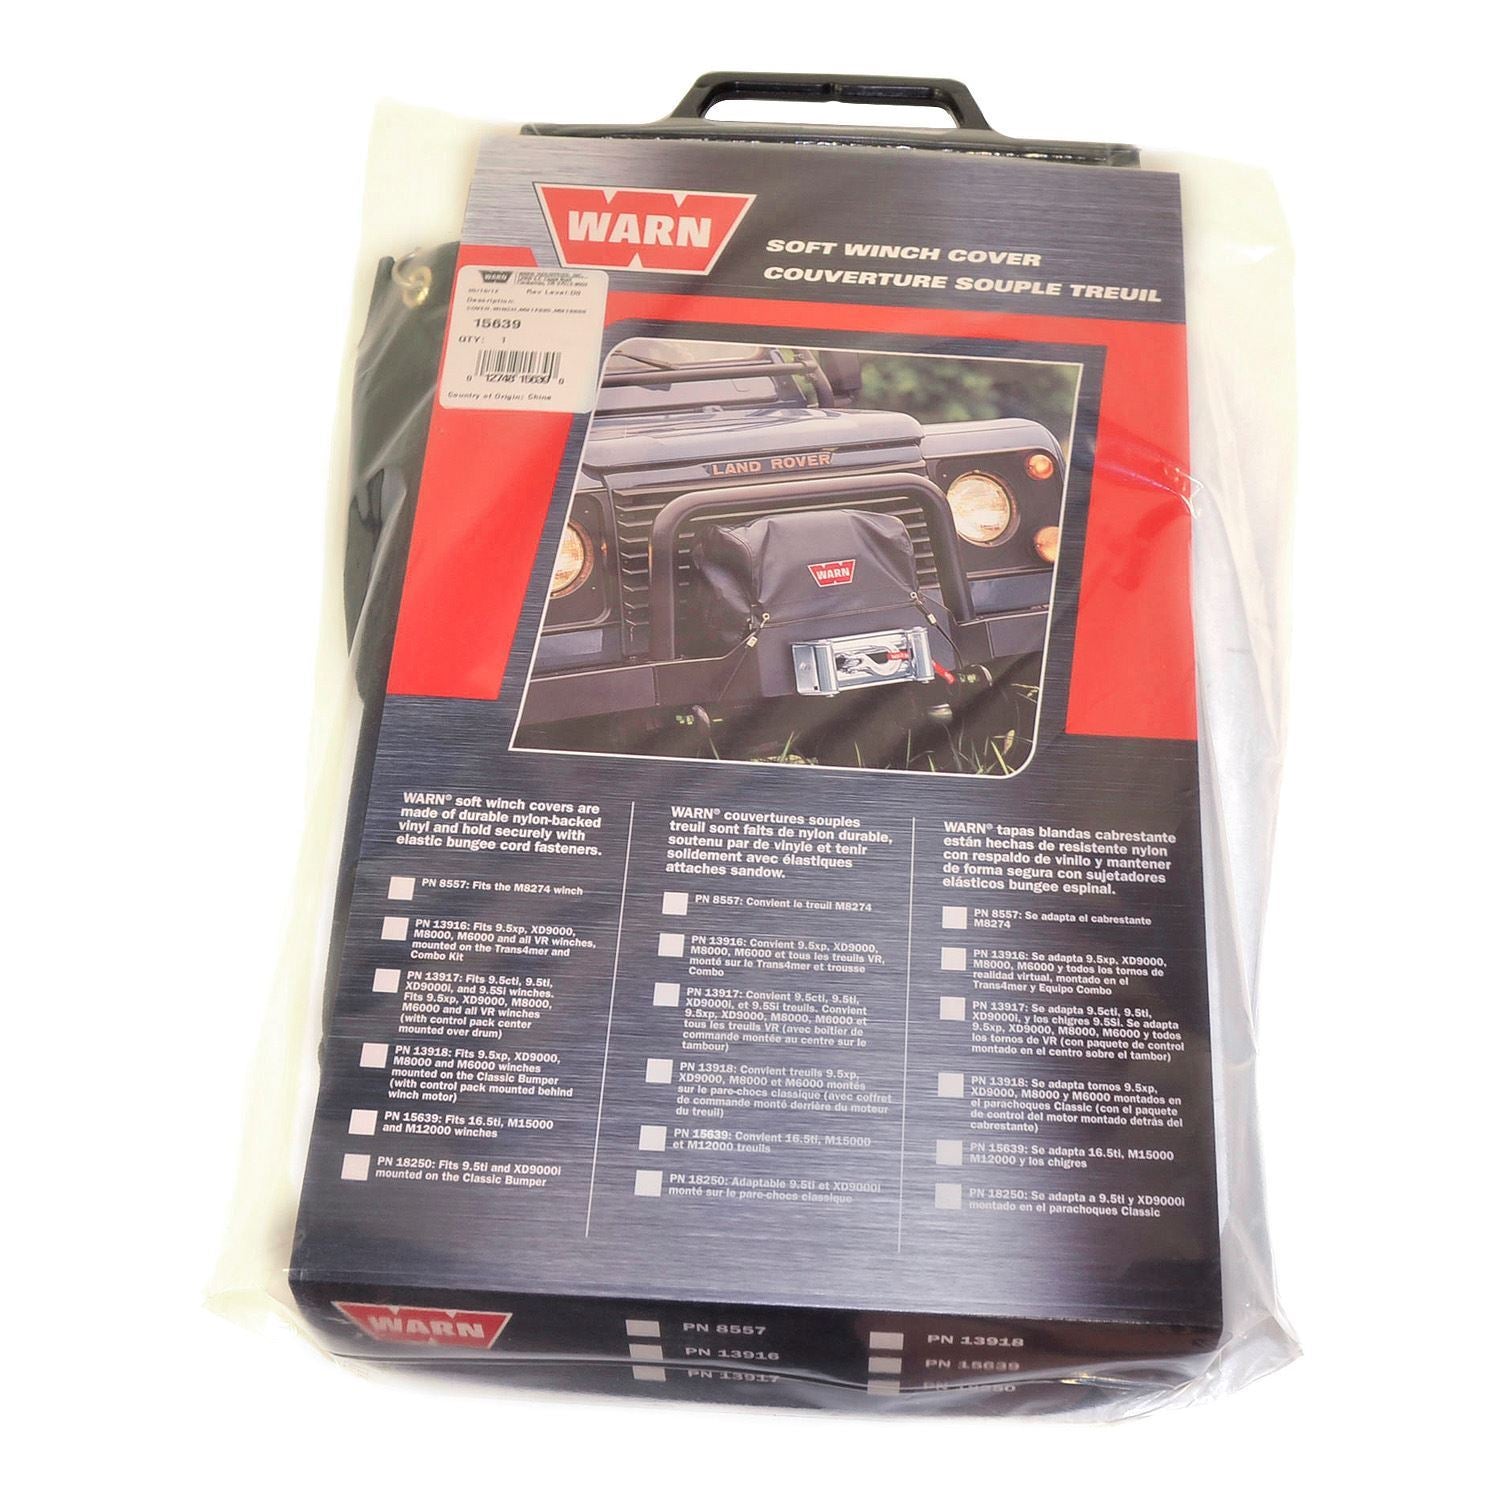 WARN Soft Winch Cover for 16.5ti, M15000 and M12000